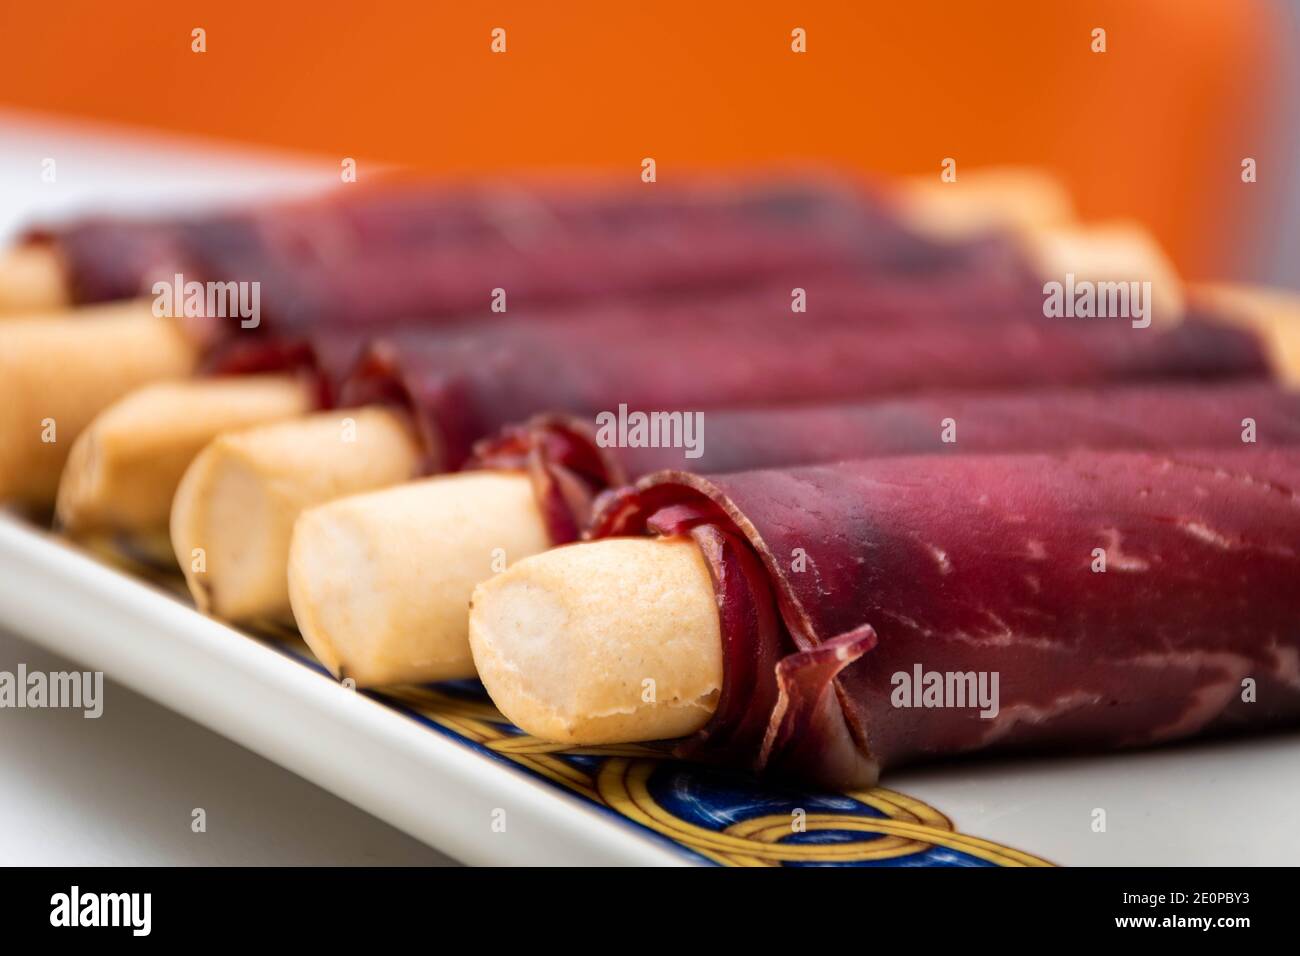 Cecina de León and ham rolled up into an elongated snack. Macro view with background blur Stock Photo